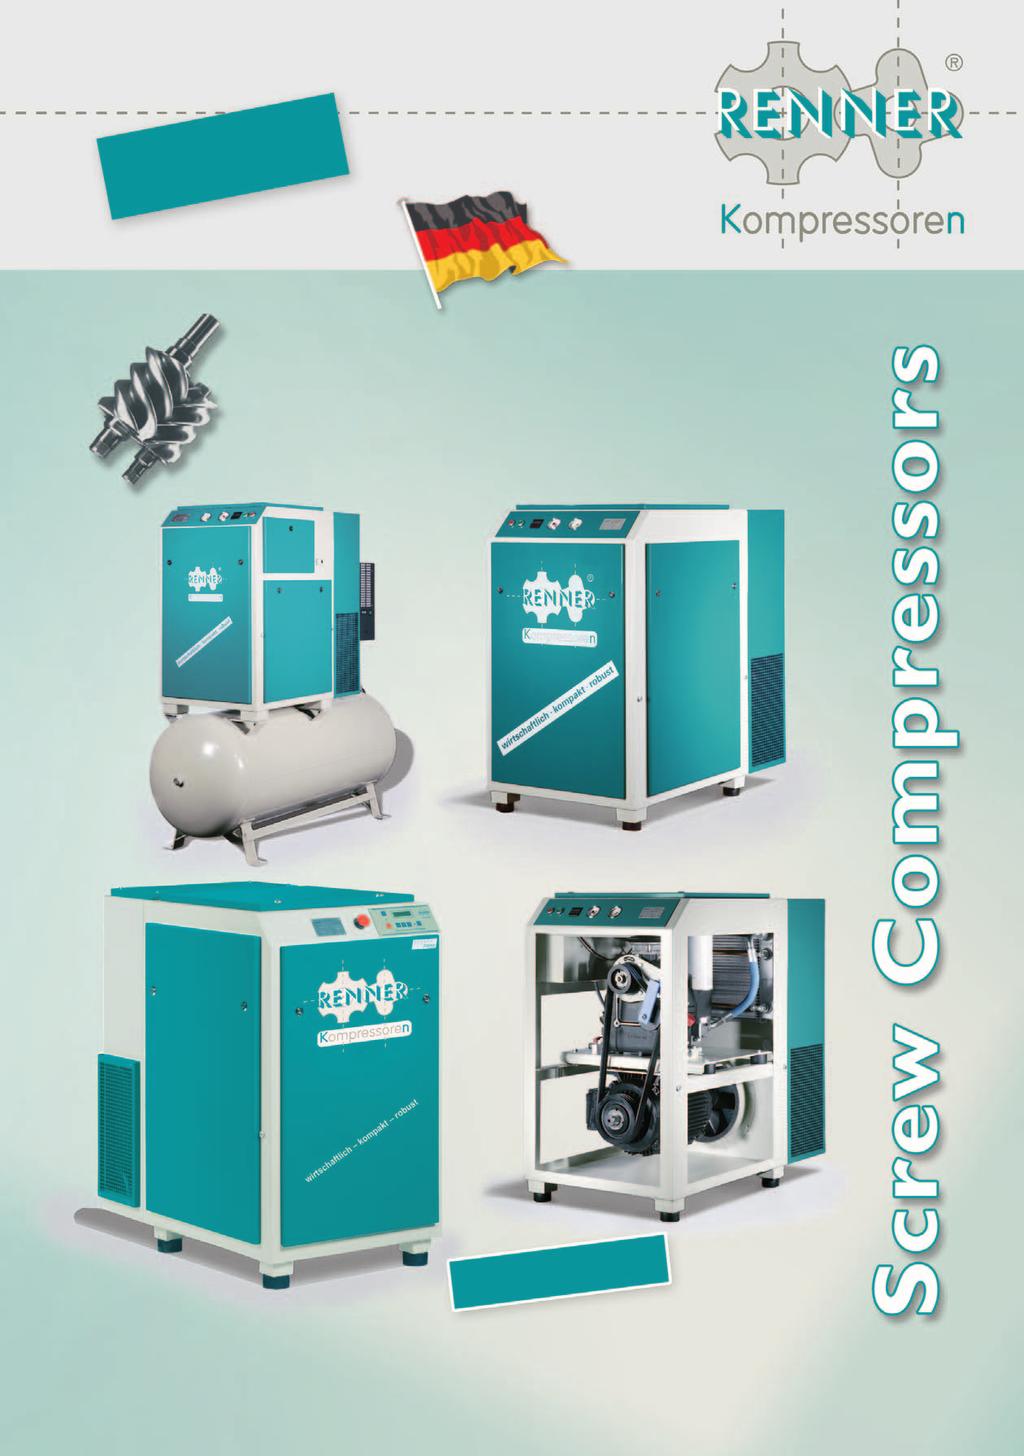 Manufacturer of Compressors Hersteller von Kompressoren Fabricant de Compresseurs Made in Germany Your reliable partner for the supply of environmentally